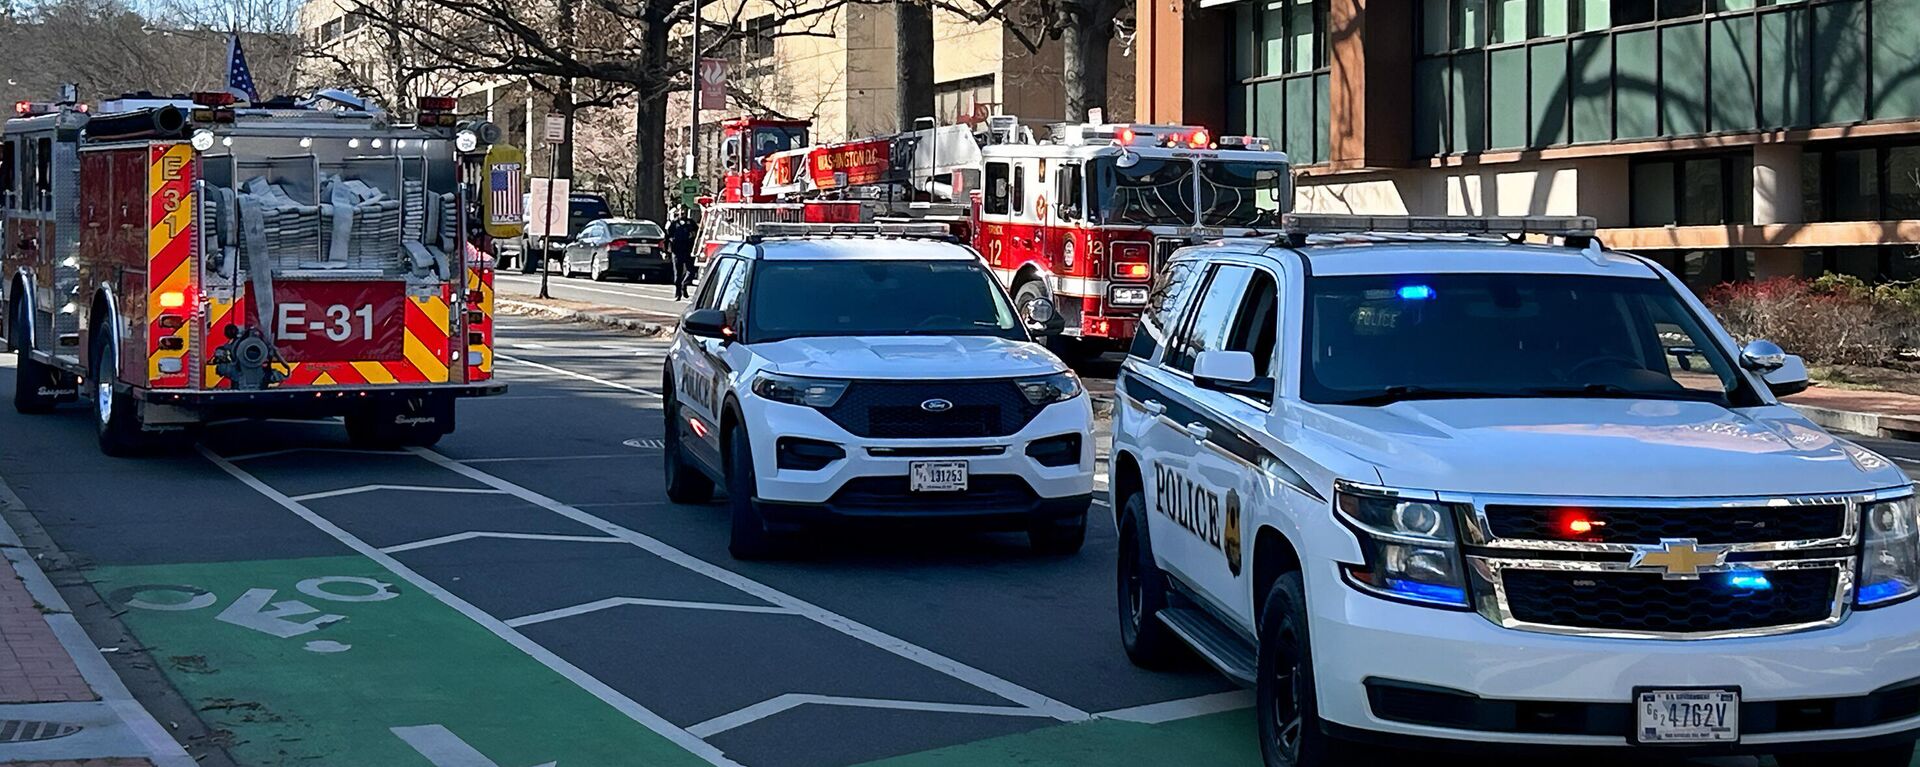 US Secret Service vehicles block access to a street leading to the Embassy of Israel in Washington, DC on February 25, 2024. A man reportedly set  himself on fire near the embassy on Sunday afternoon.  - Sputnik International, 1920, 26.02.2024